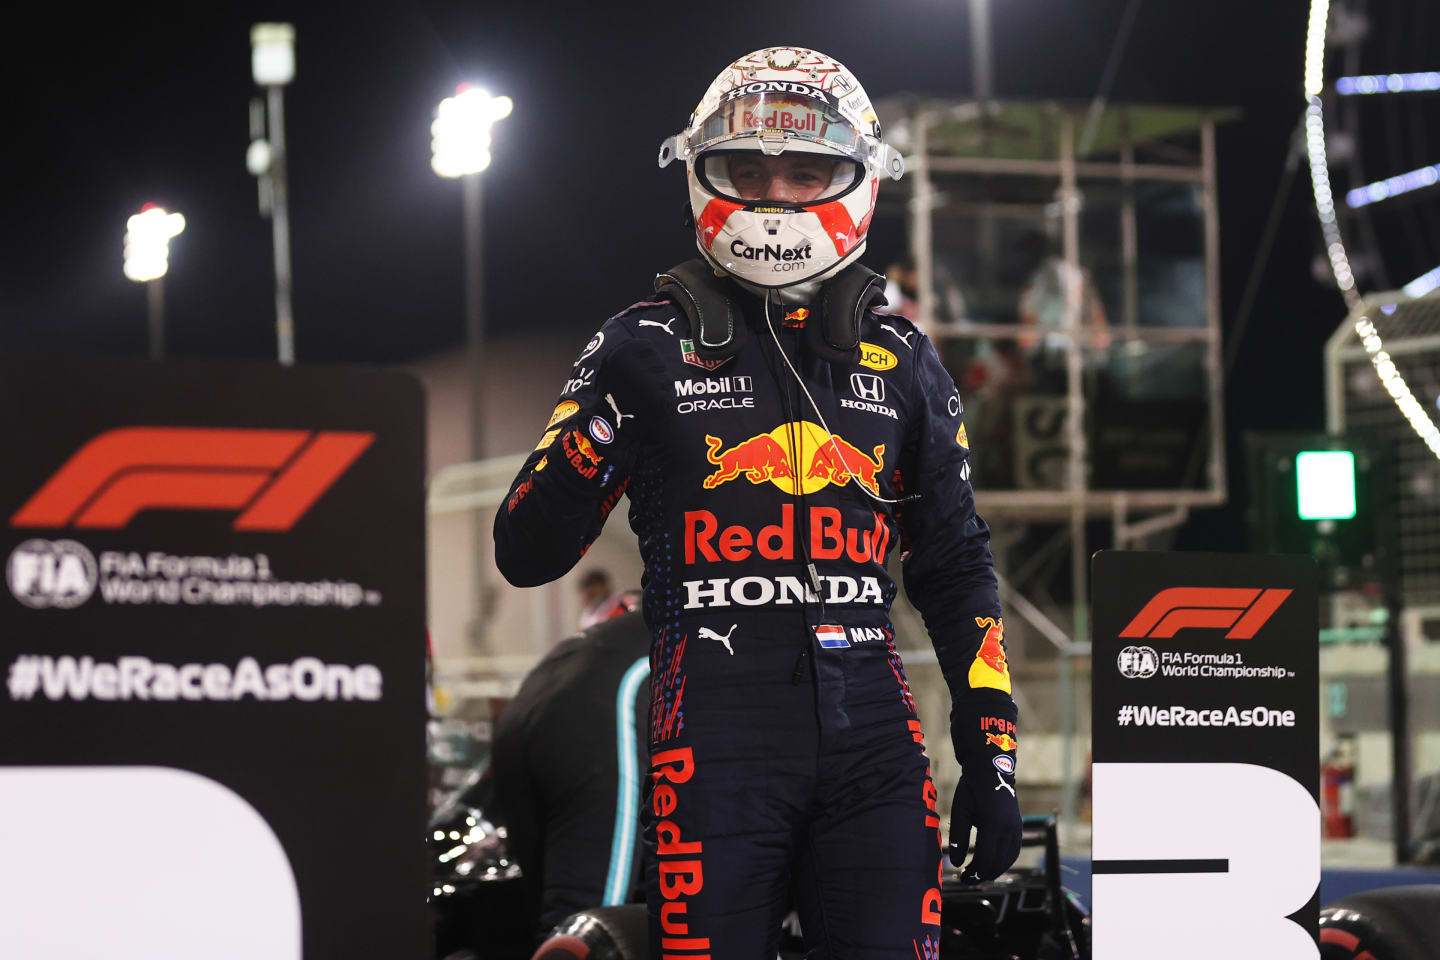 BAHRAIN, BAHRAIN - MARCH 27: Pole position qualifier Max Verstappen of Netherlands and Red Bull